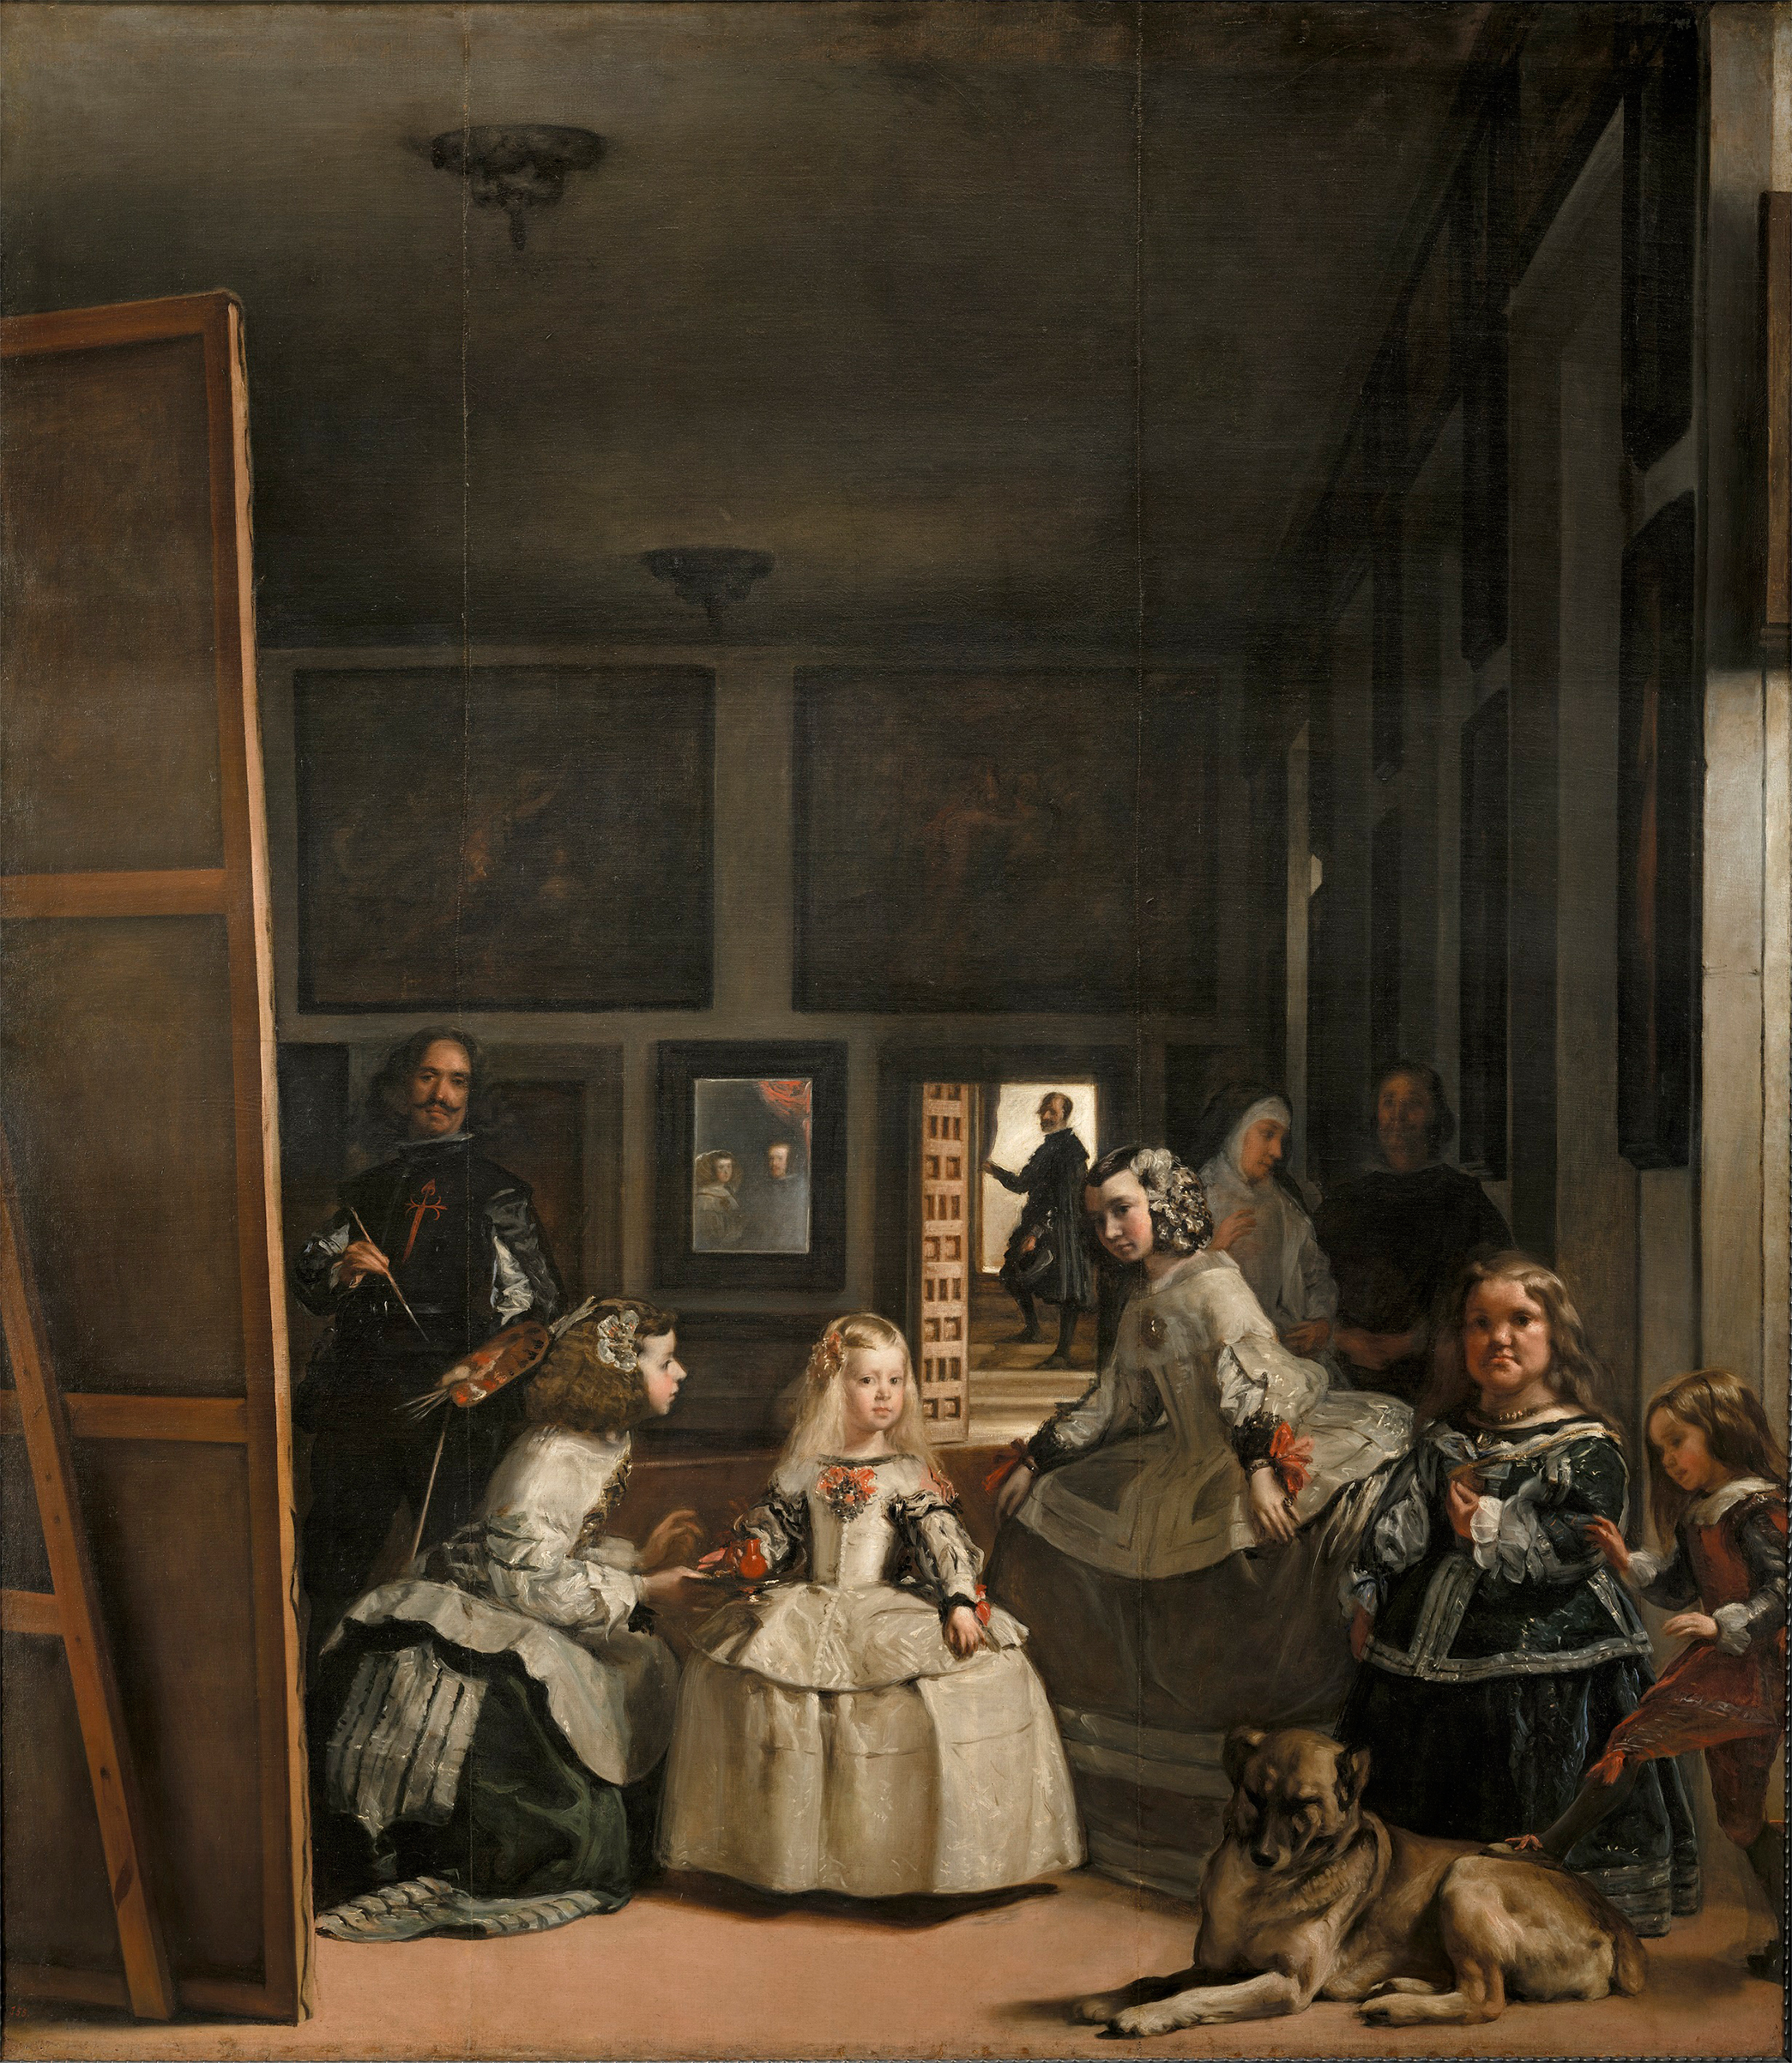 Las Meninas by Diego Velazquez, a 1656 painting of the Spanish royal family with his self portrait.